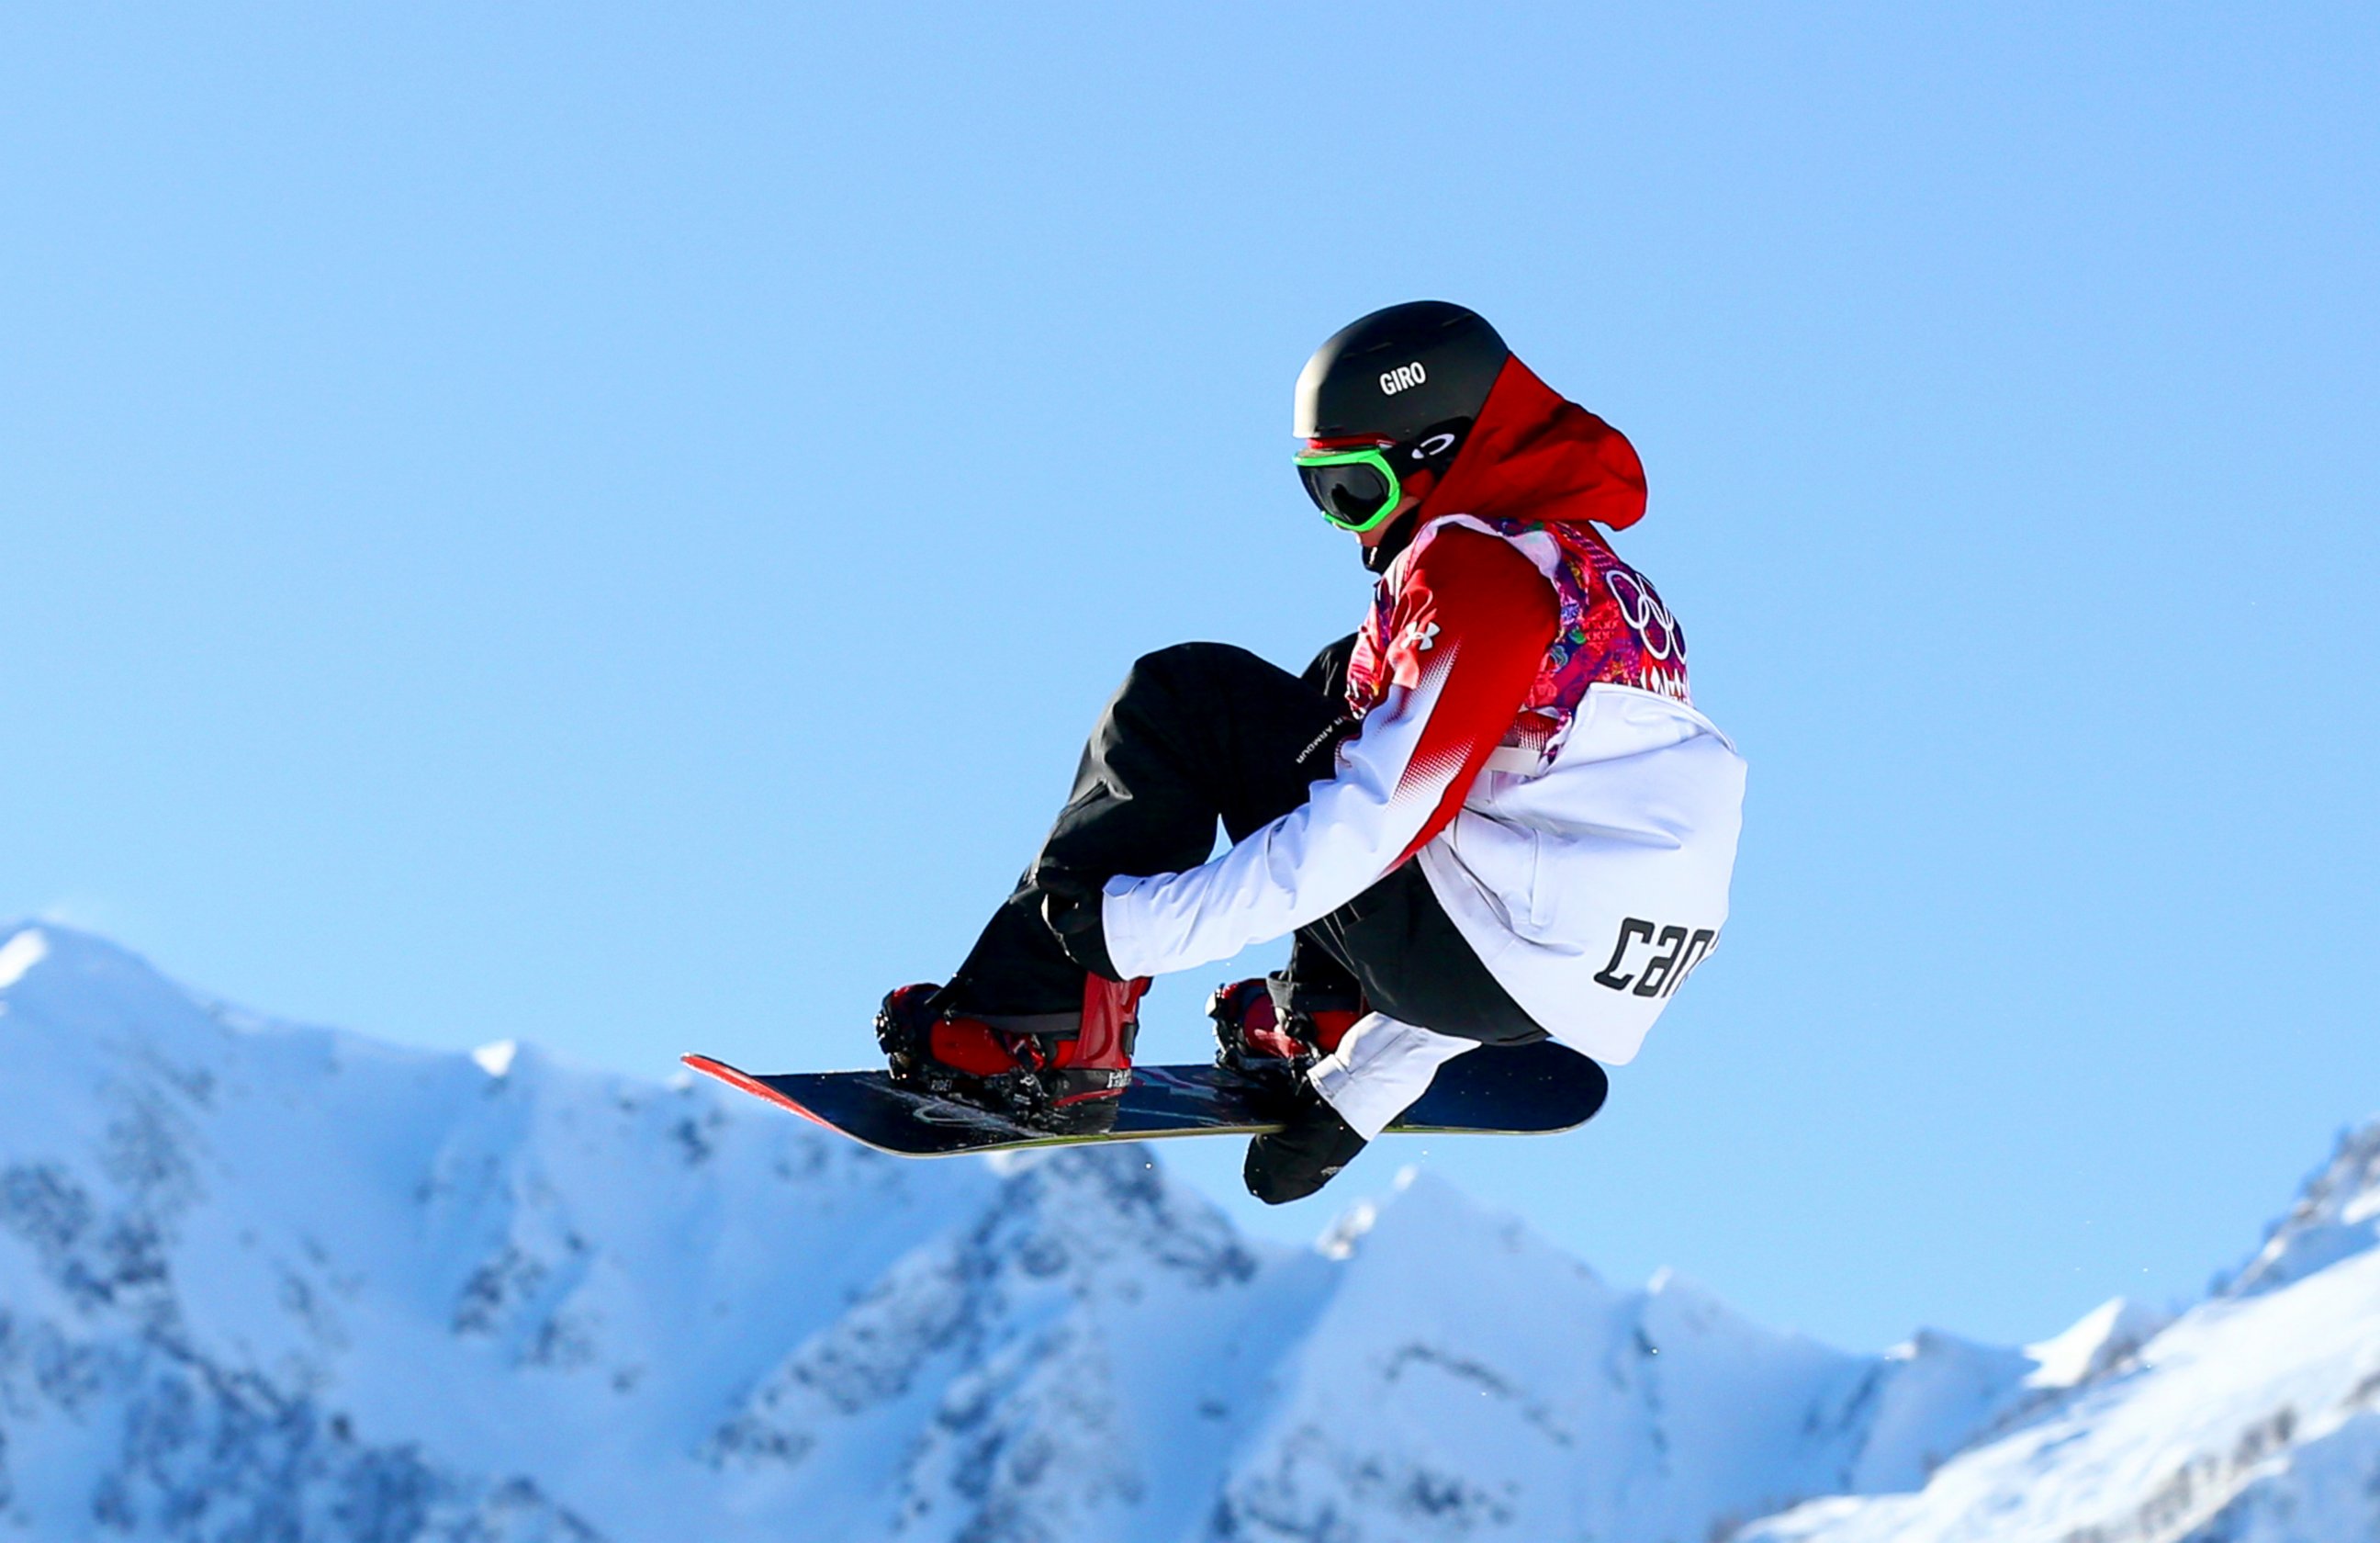 PHOTO: Sebastien Toutant of Canada competes in the men's slopestyle qualification during the 2014 Sochi Winter Olympics at Rosa Khutor Extreme Park, Feb. 6, 2014, in Sochi, Russia.